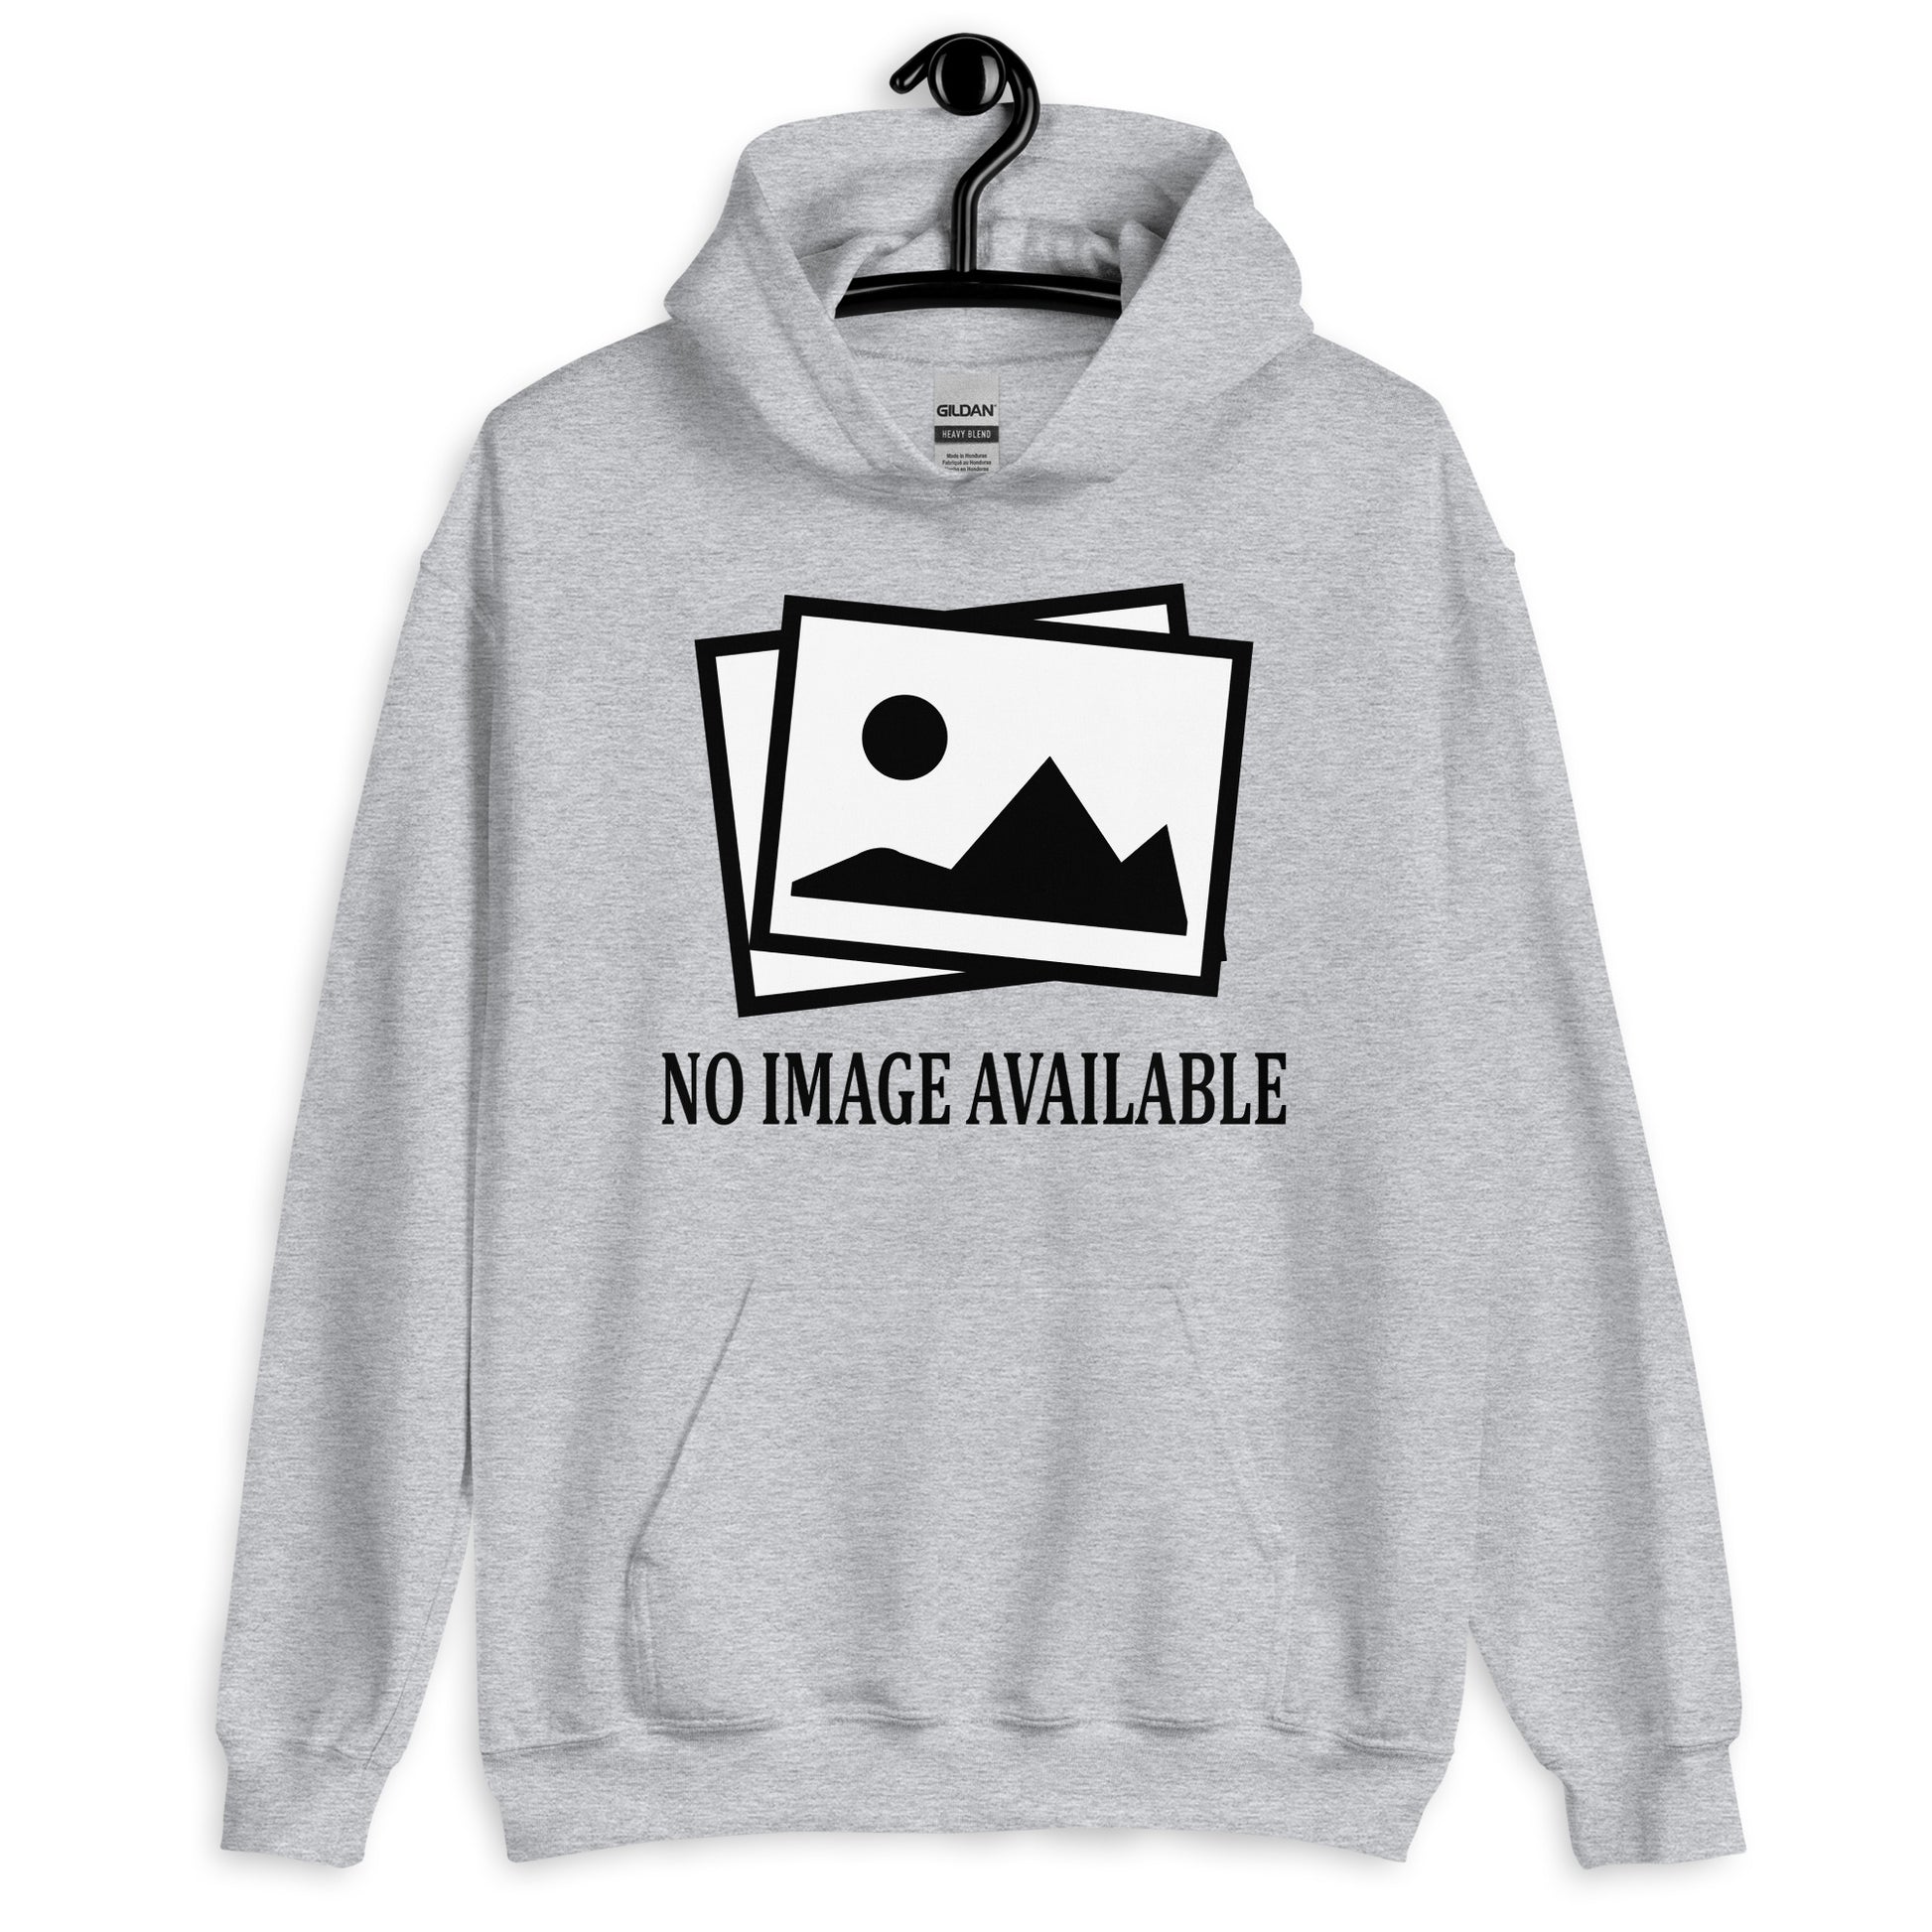 grey hoodie with image and text "no image available"